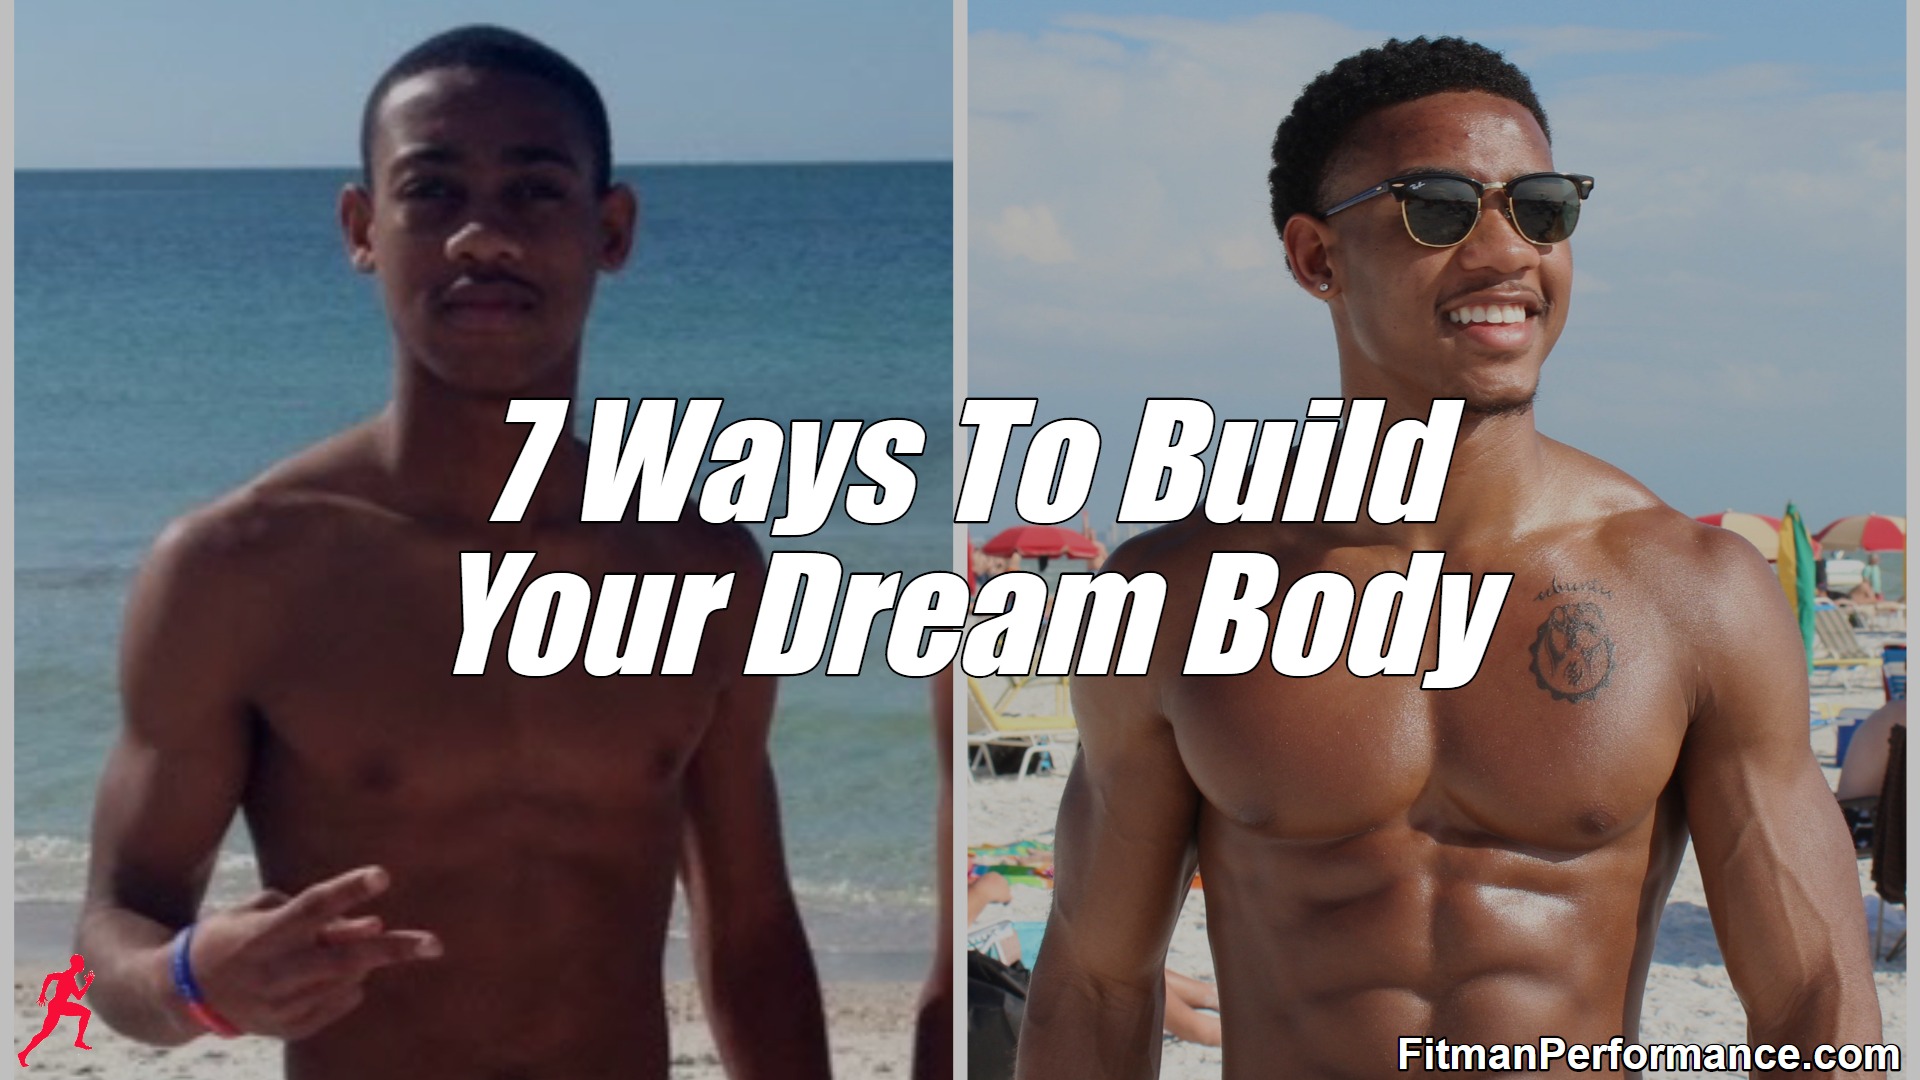 7 Ways To Build Your Dream Body